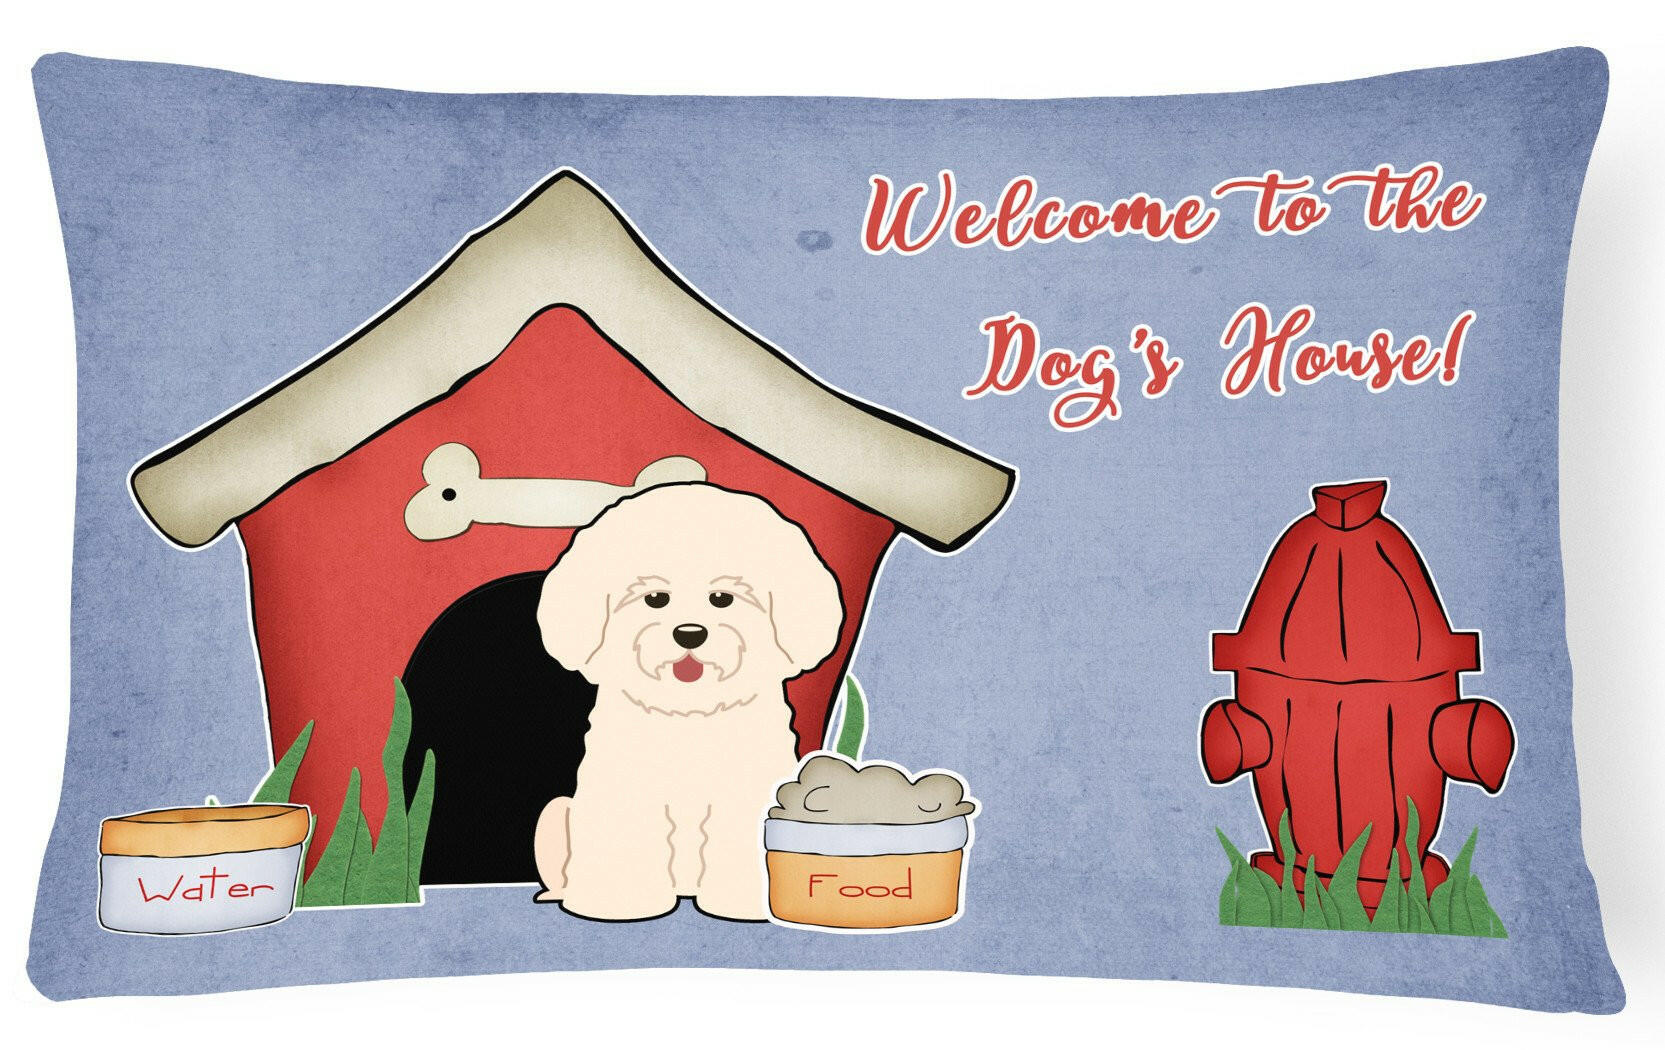 Dog House Collection Bichon Frise Canvas Fabric Decorative Pillow BB2829PW1216 by Caroline's Treasures